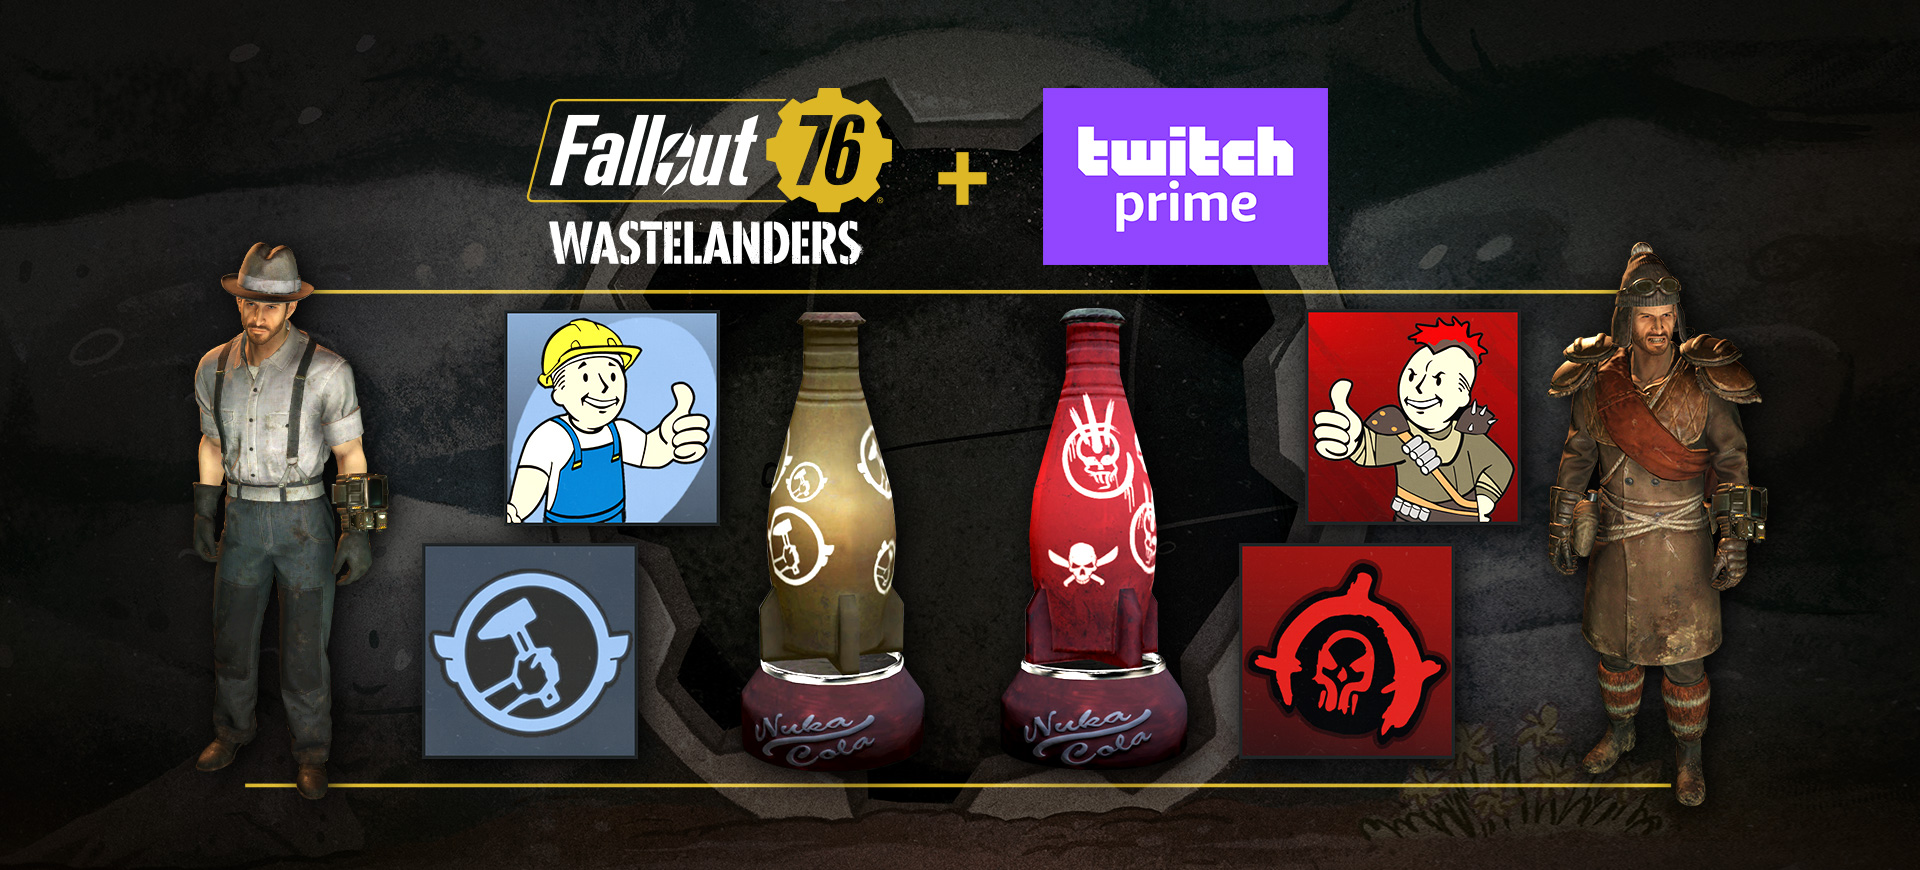 Fallout 76 Twitch Prime Wastelanders バンドル